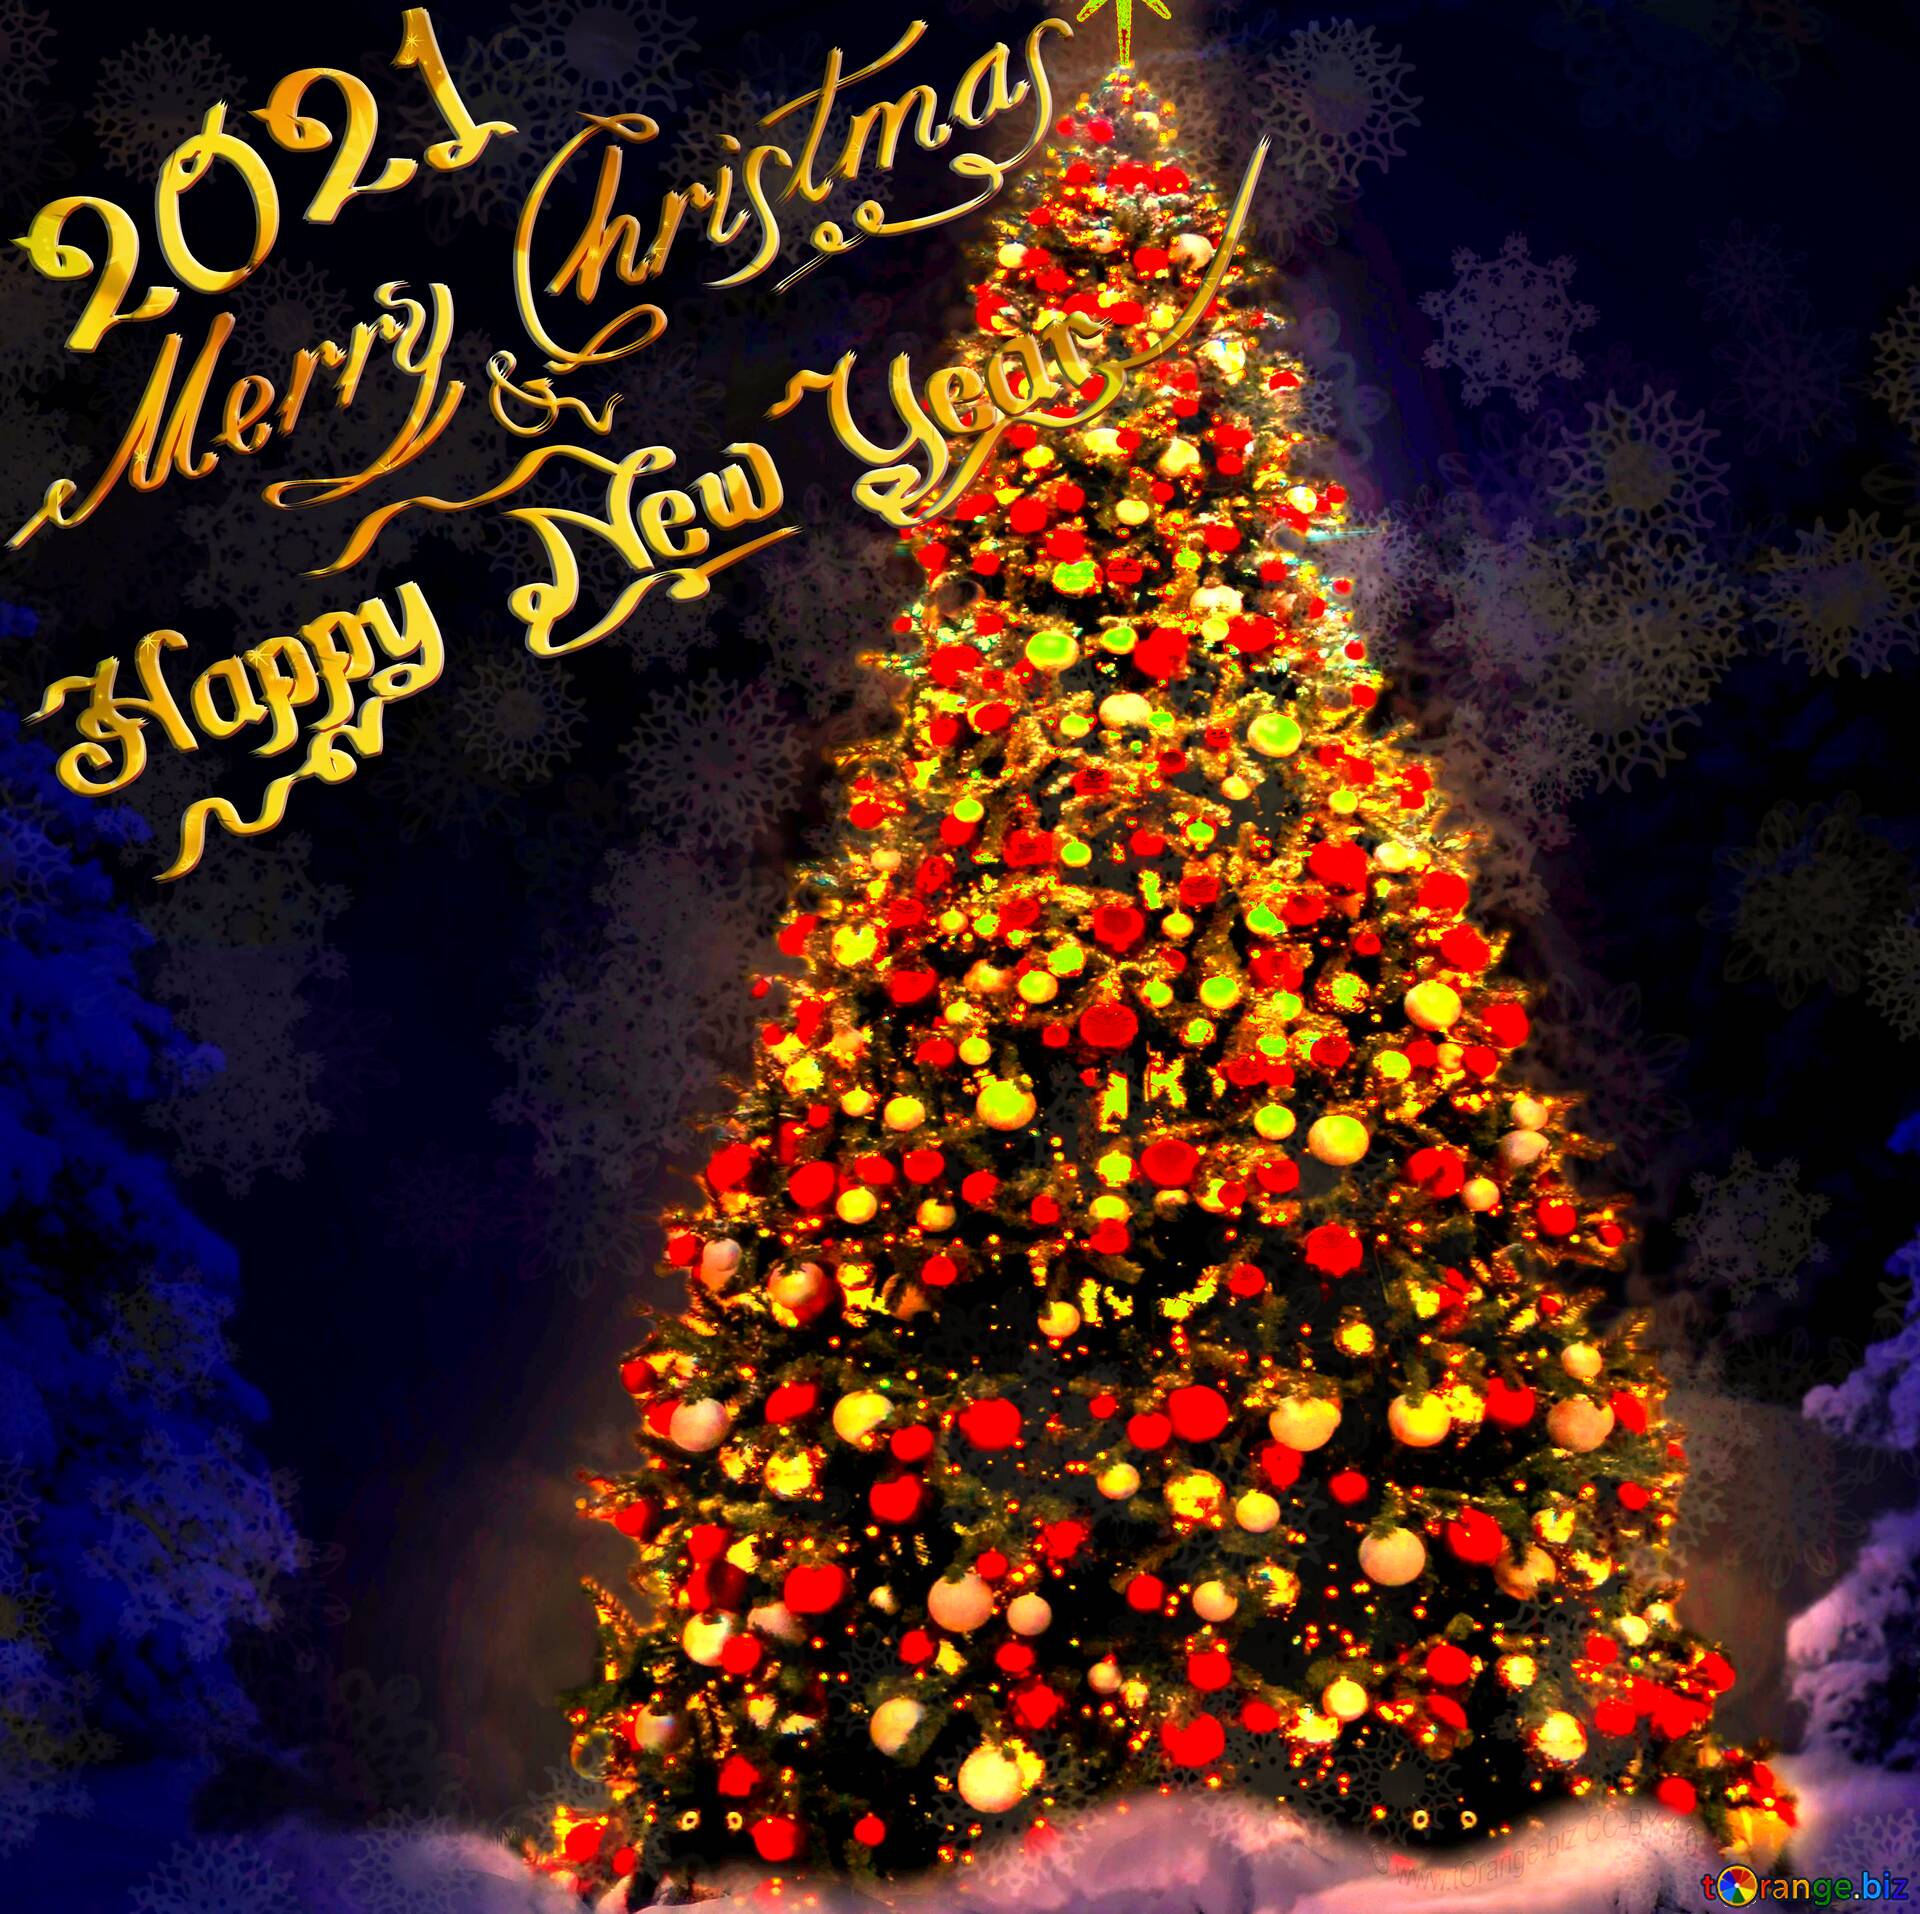 Merry Christmas 2021 Wallpapers - Wallpaper Cave